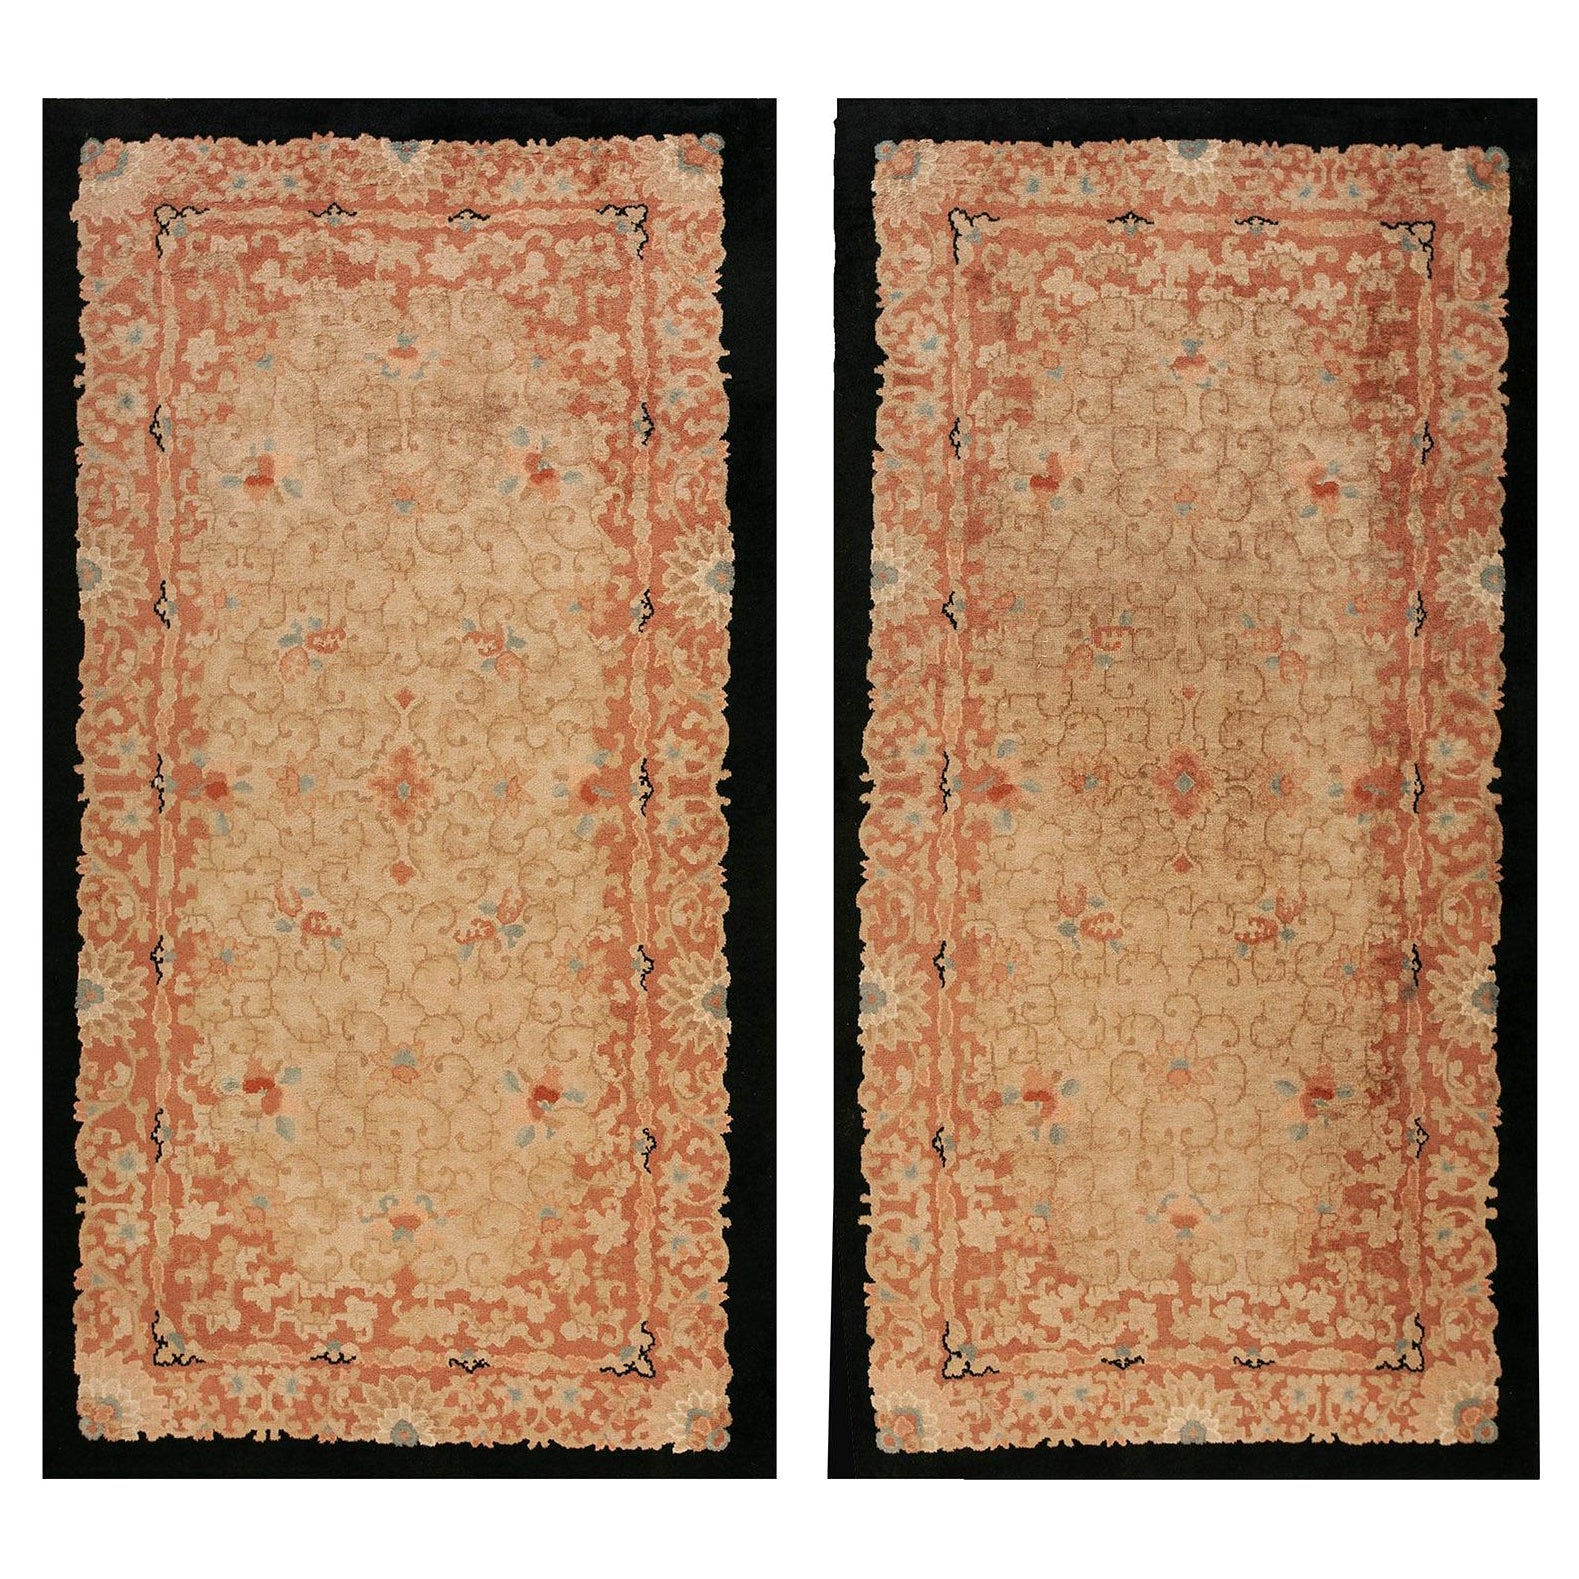 1920s Pair of Chinese Art Deco Carpets by Fette-Li Workshop (4'x7'10"-122x238) For Sale